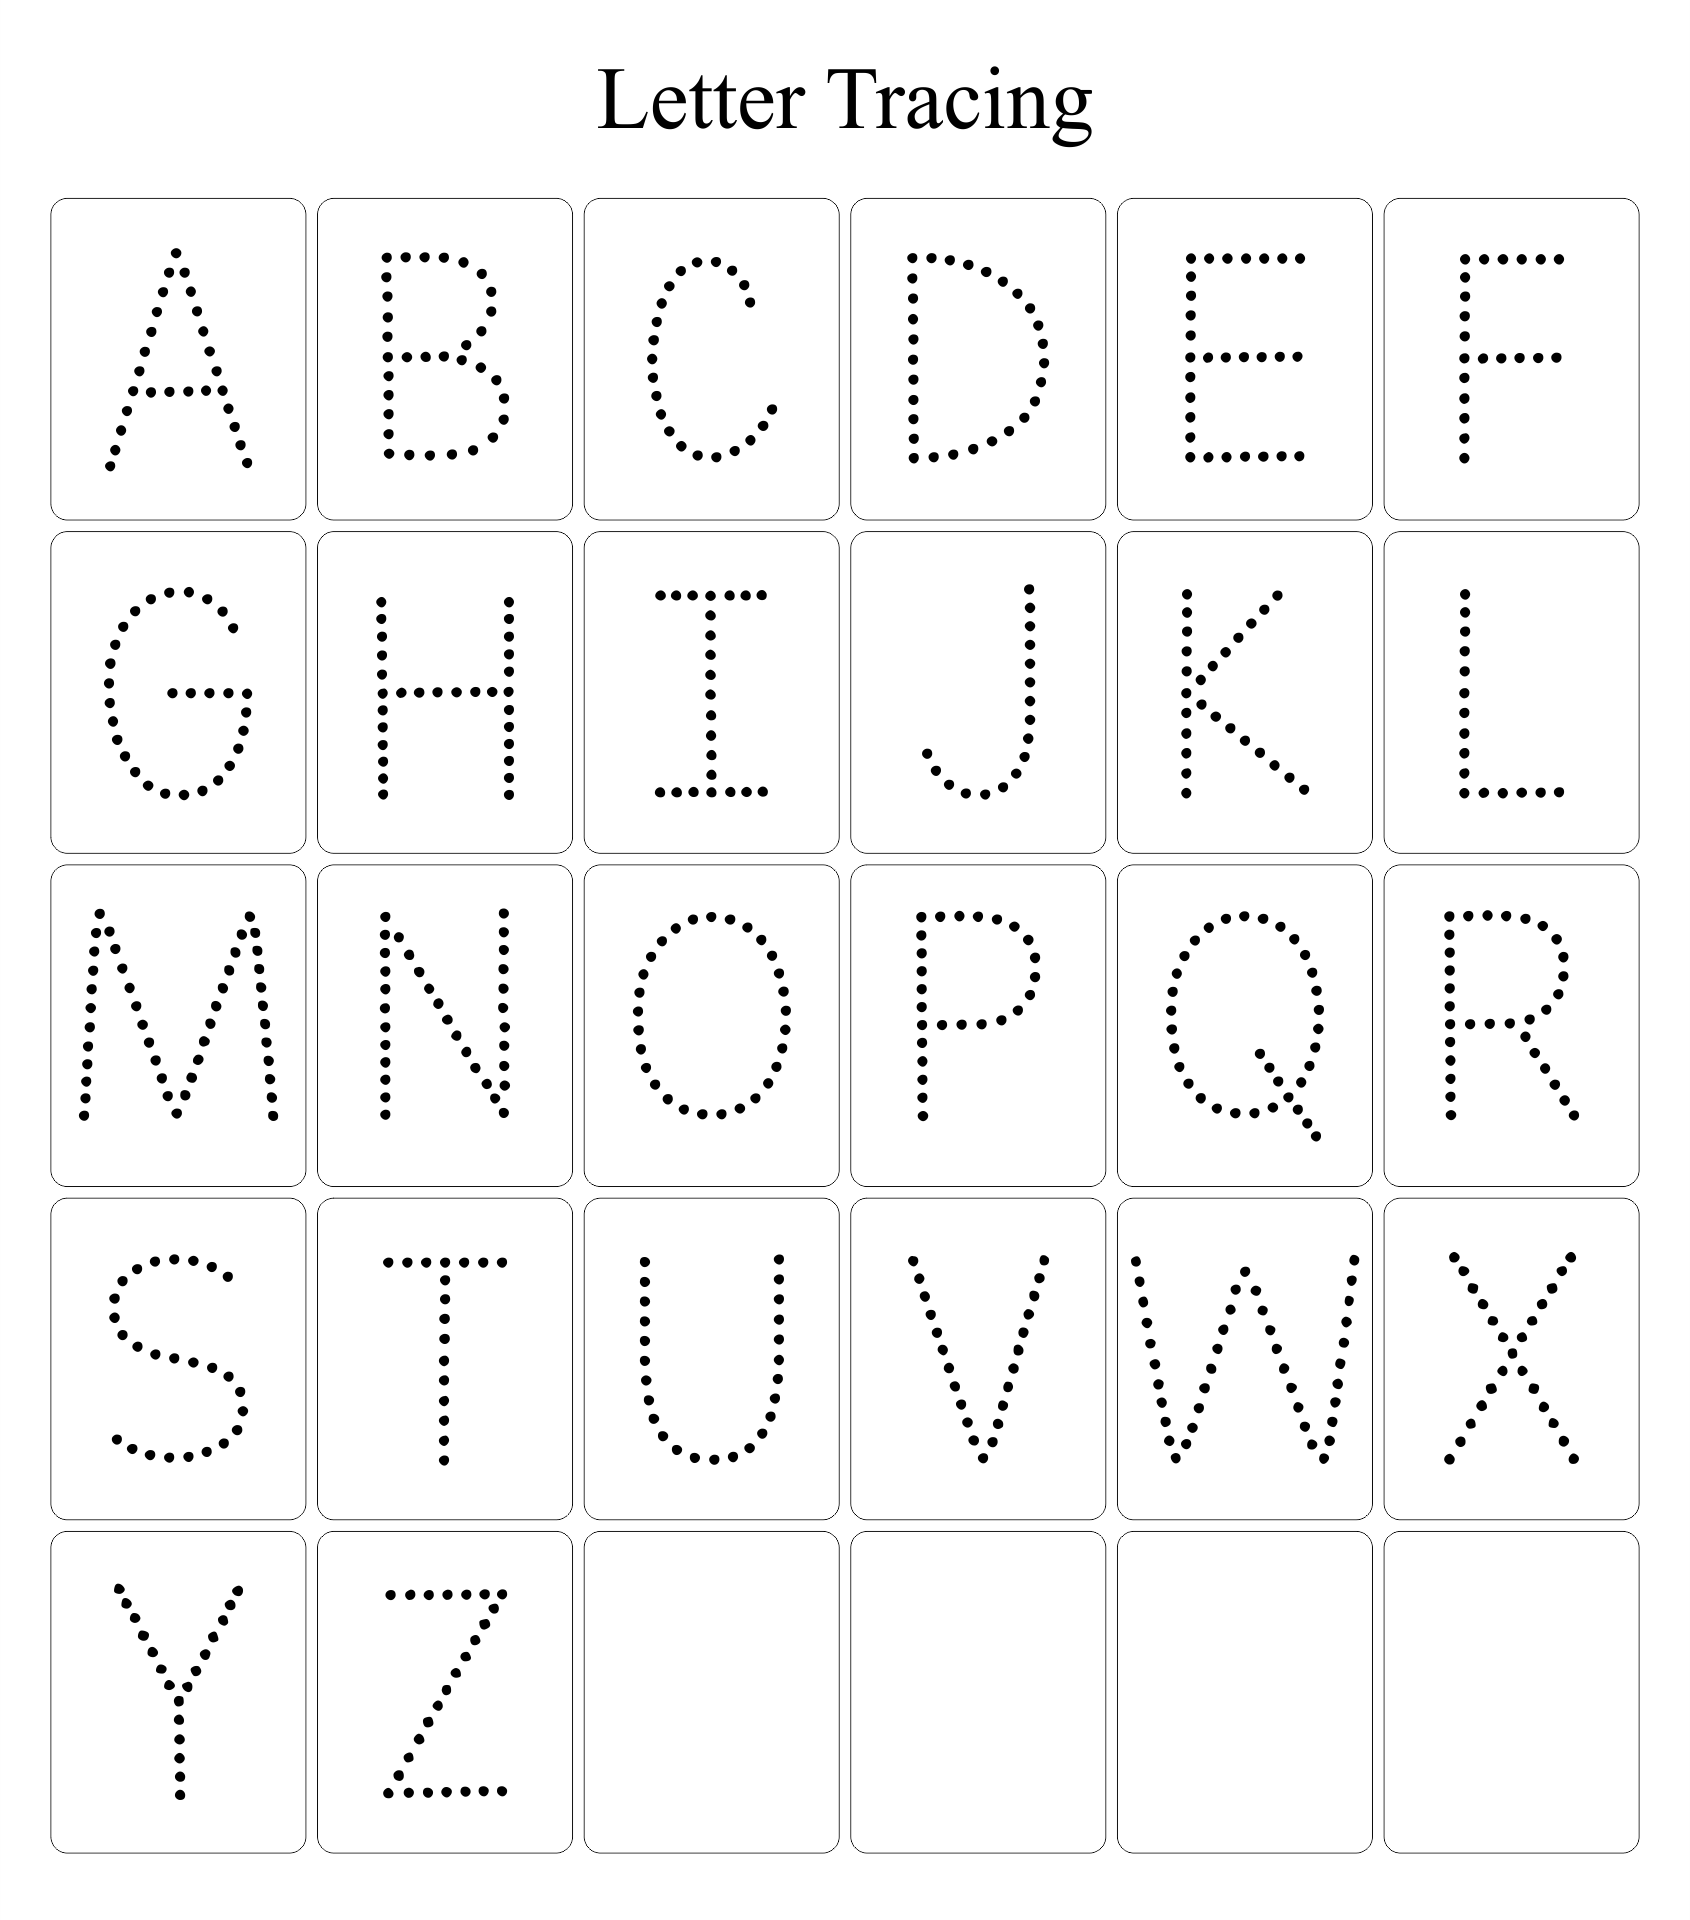 tracing-letters-worksheets-printable